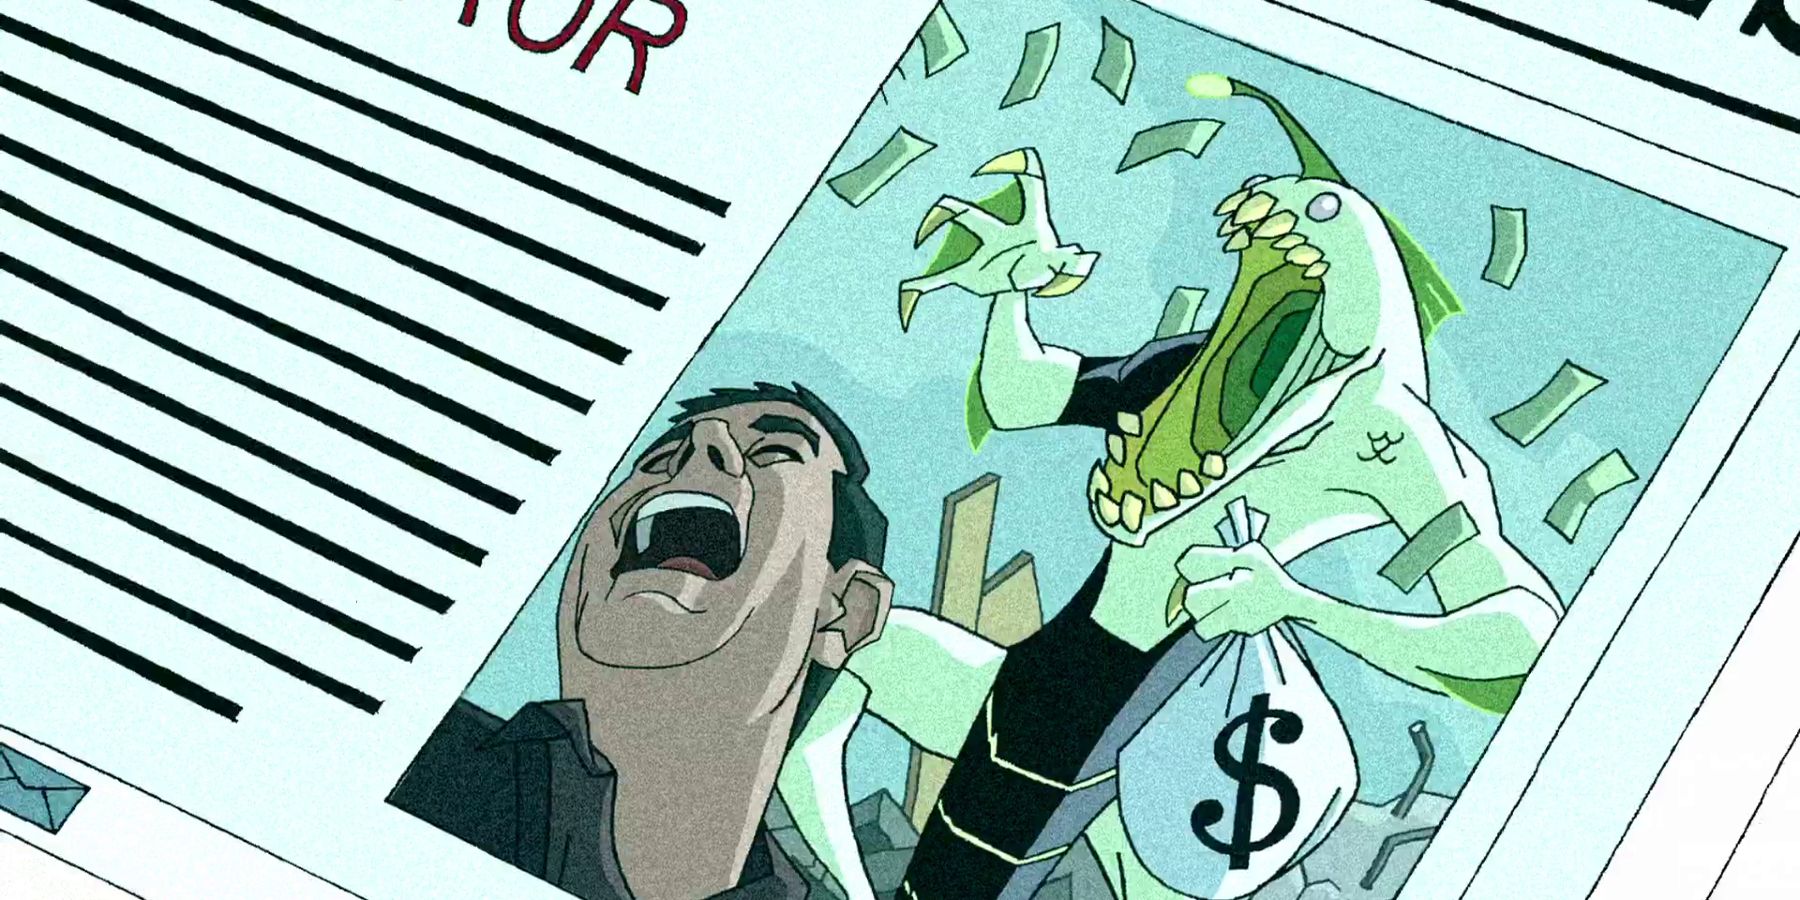 Newspaper showing Ripjaws robbing a bank in Ben 10.